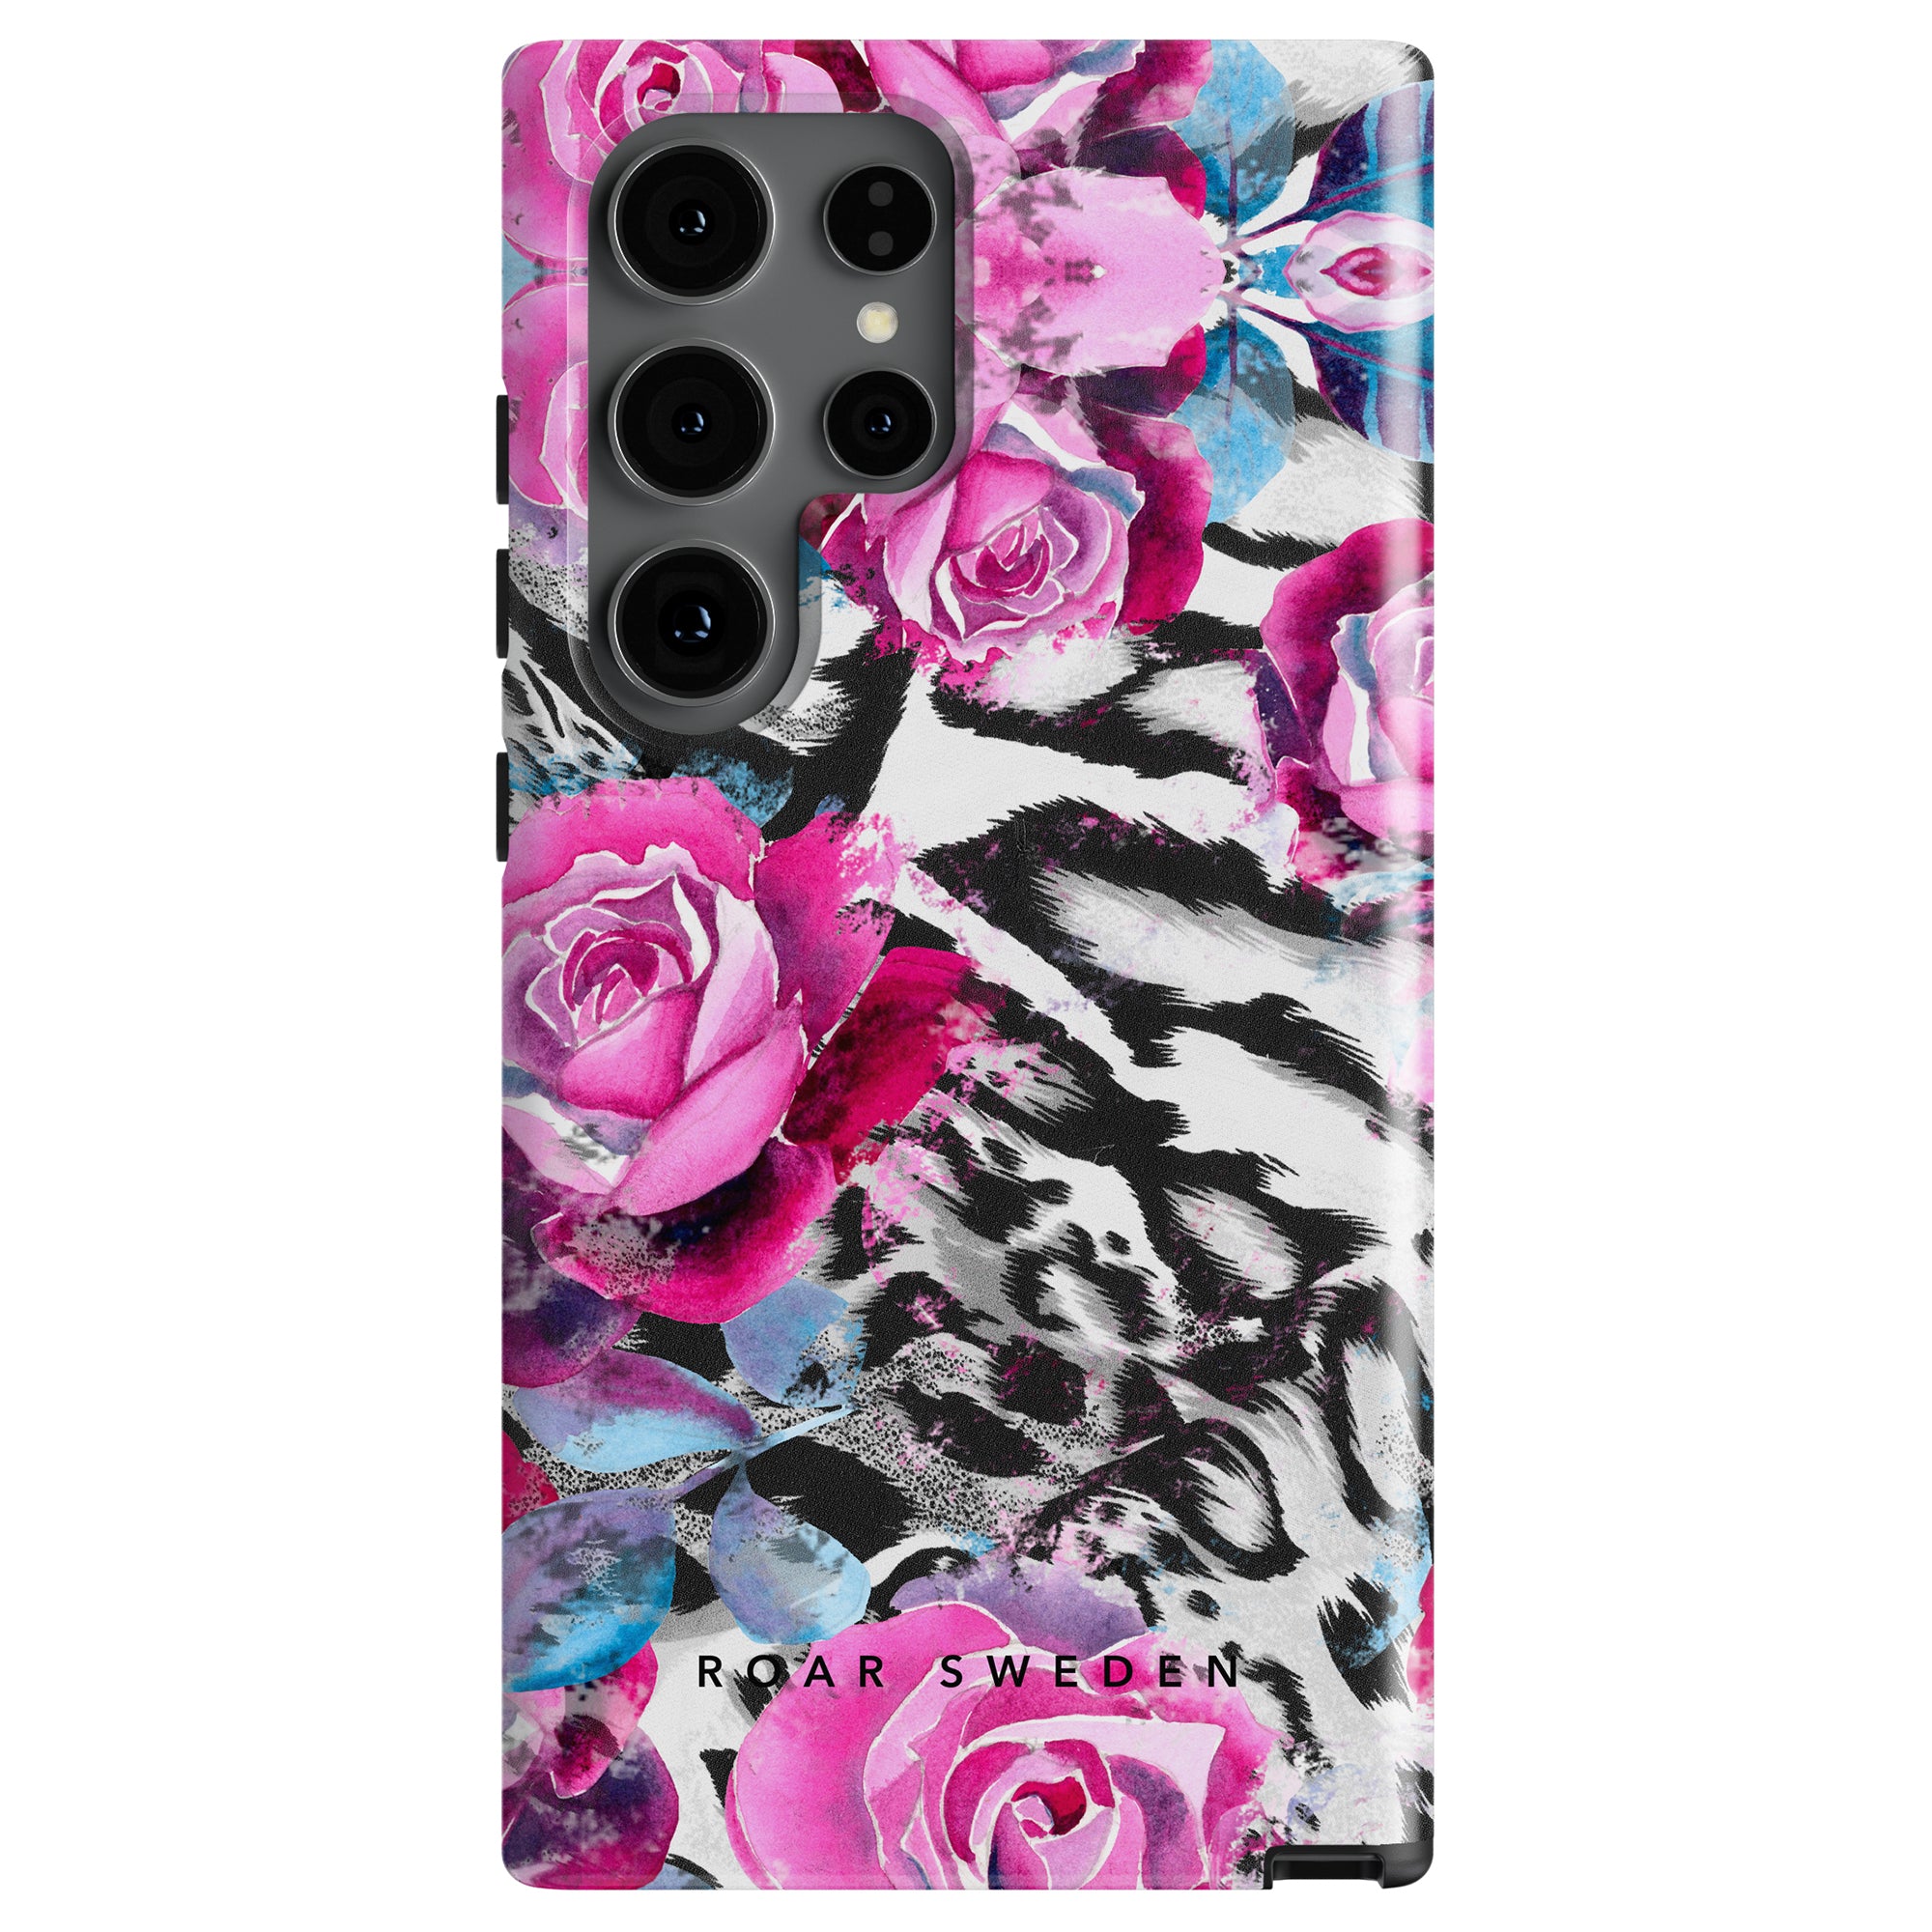 A smartphone case with a vibrant design featuring pink roses and black and white leopard pattern, labeled "Rosy Wildcat - Tough Case".